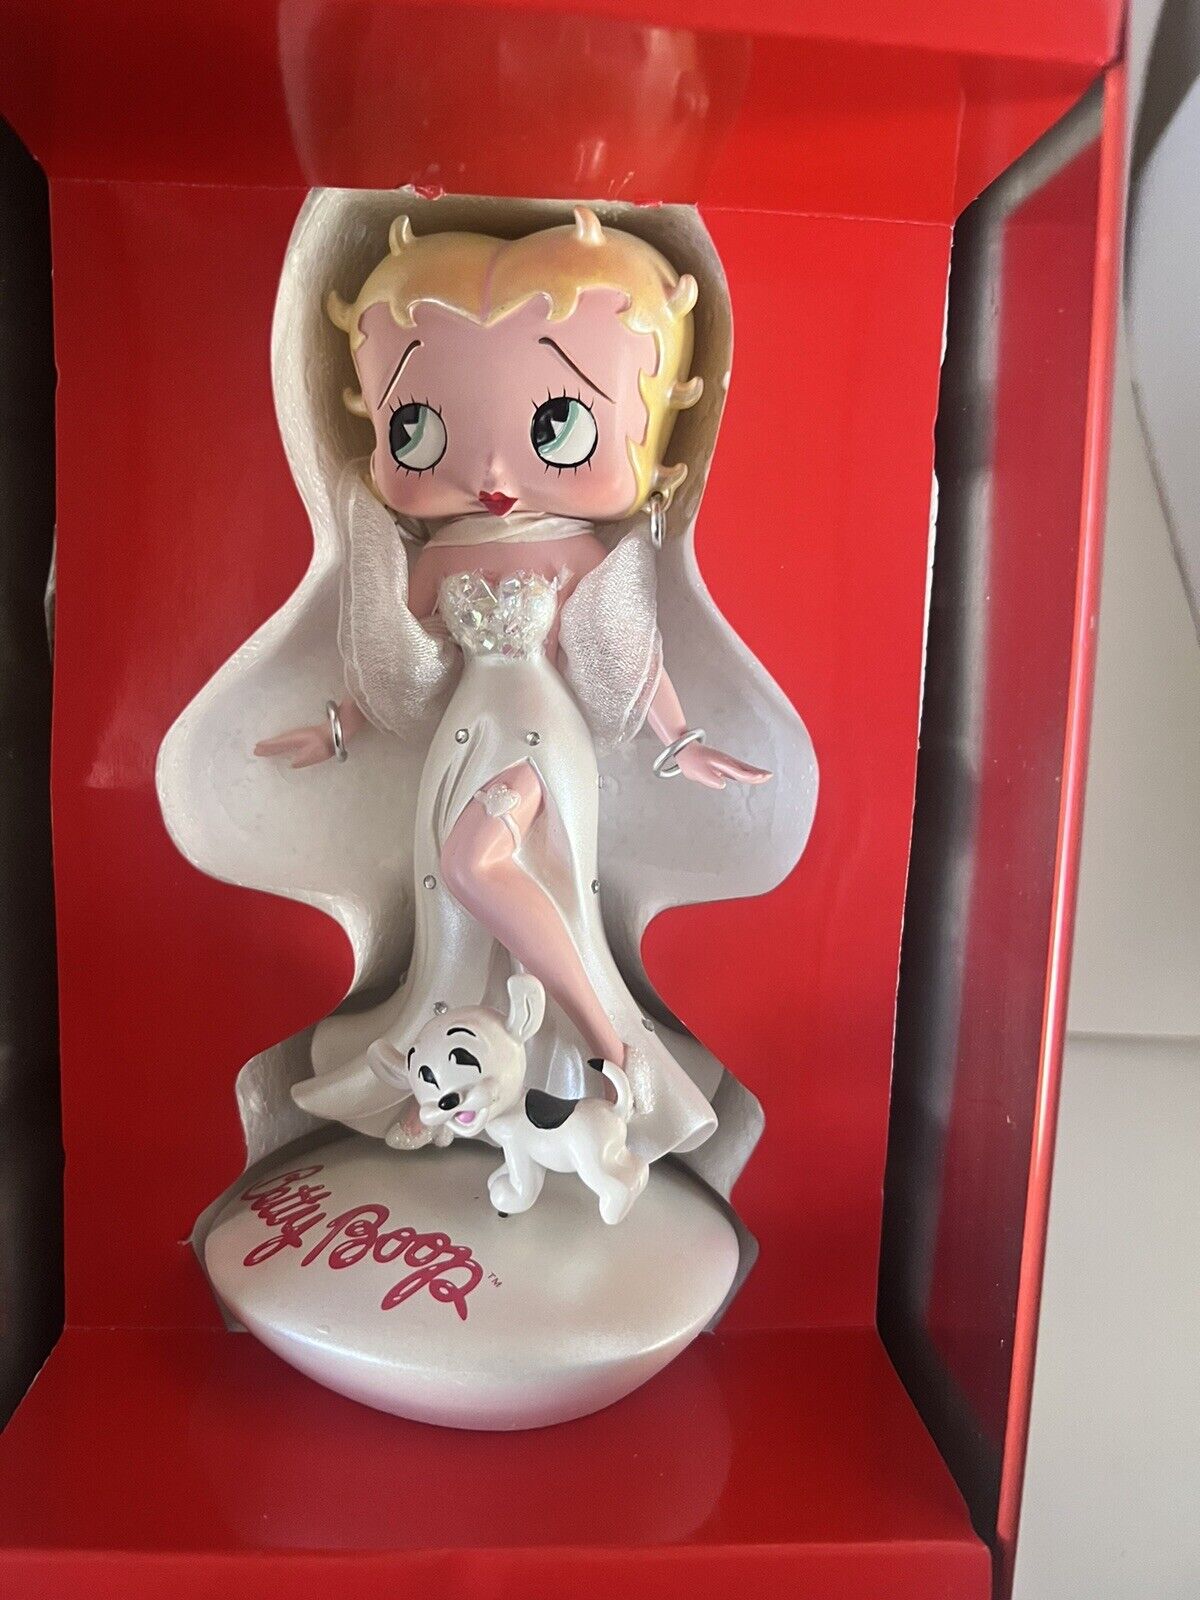 Betty Bedazzled Vandor 2005 Platinum Betty Boop Hand Numbered Limited Edition